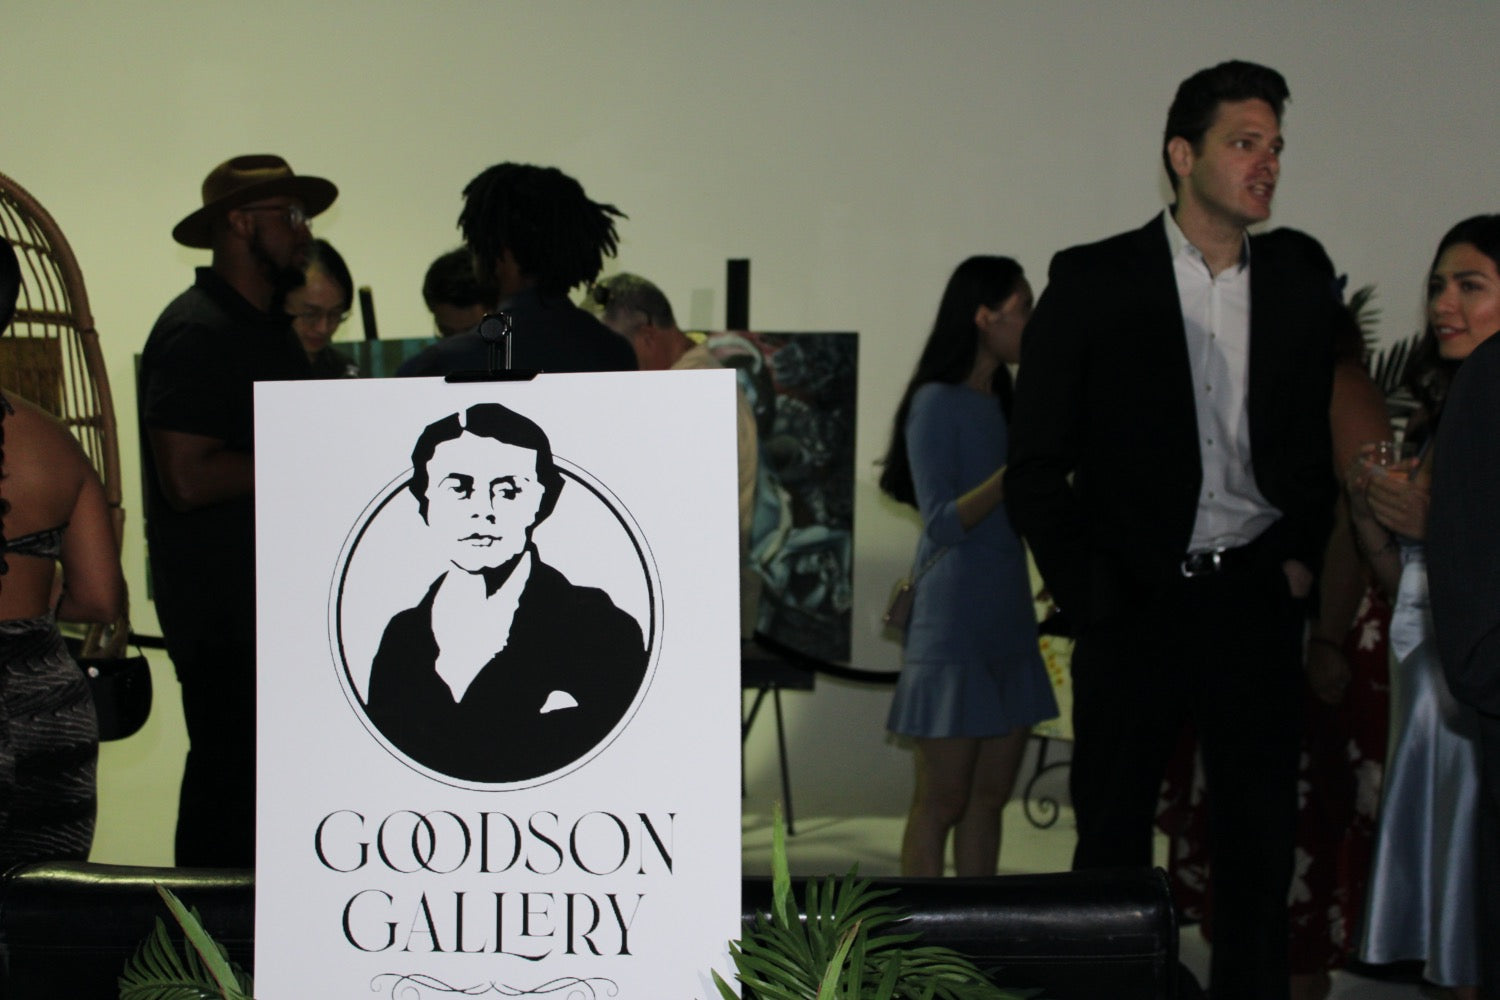 goodson gallery sign at dallas socialite networking event